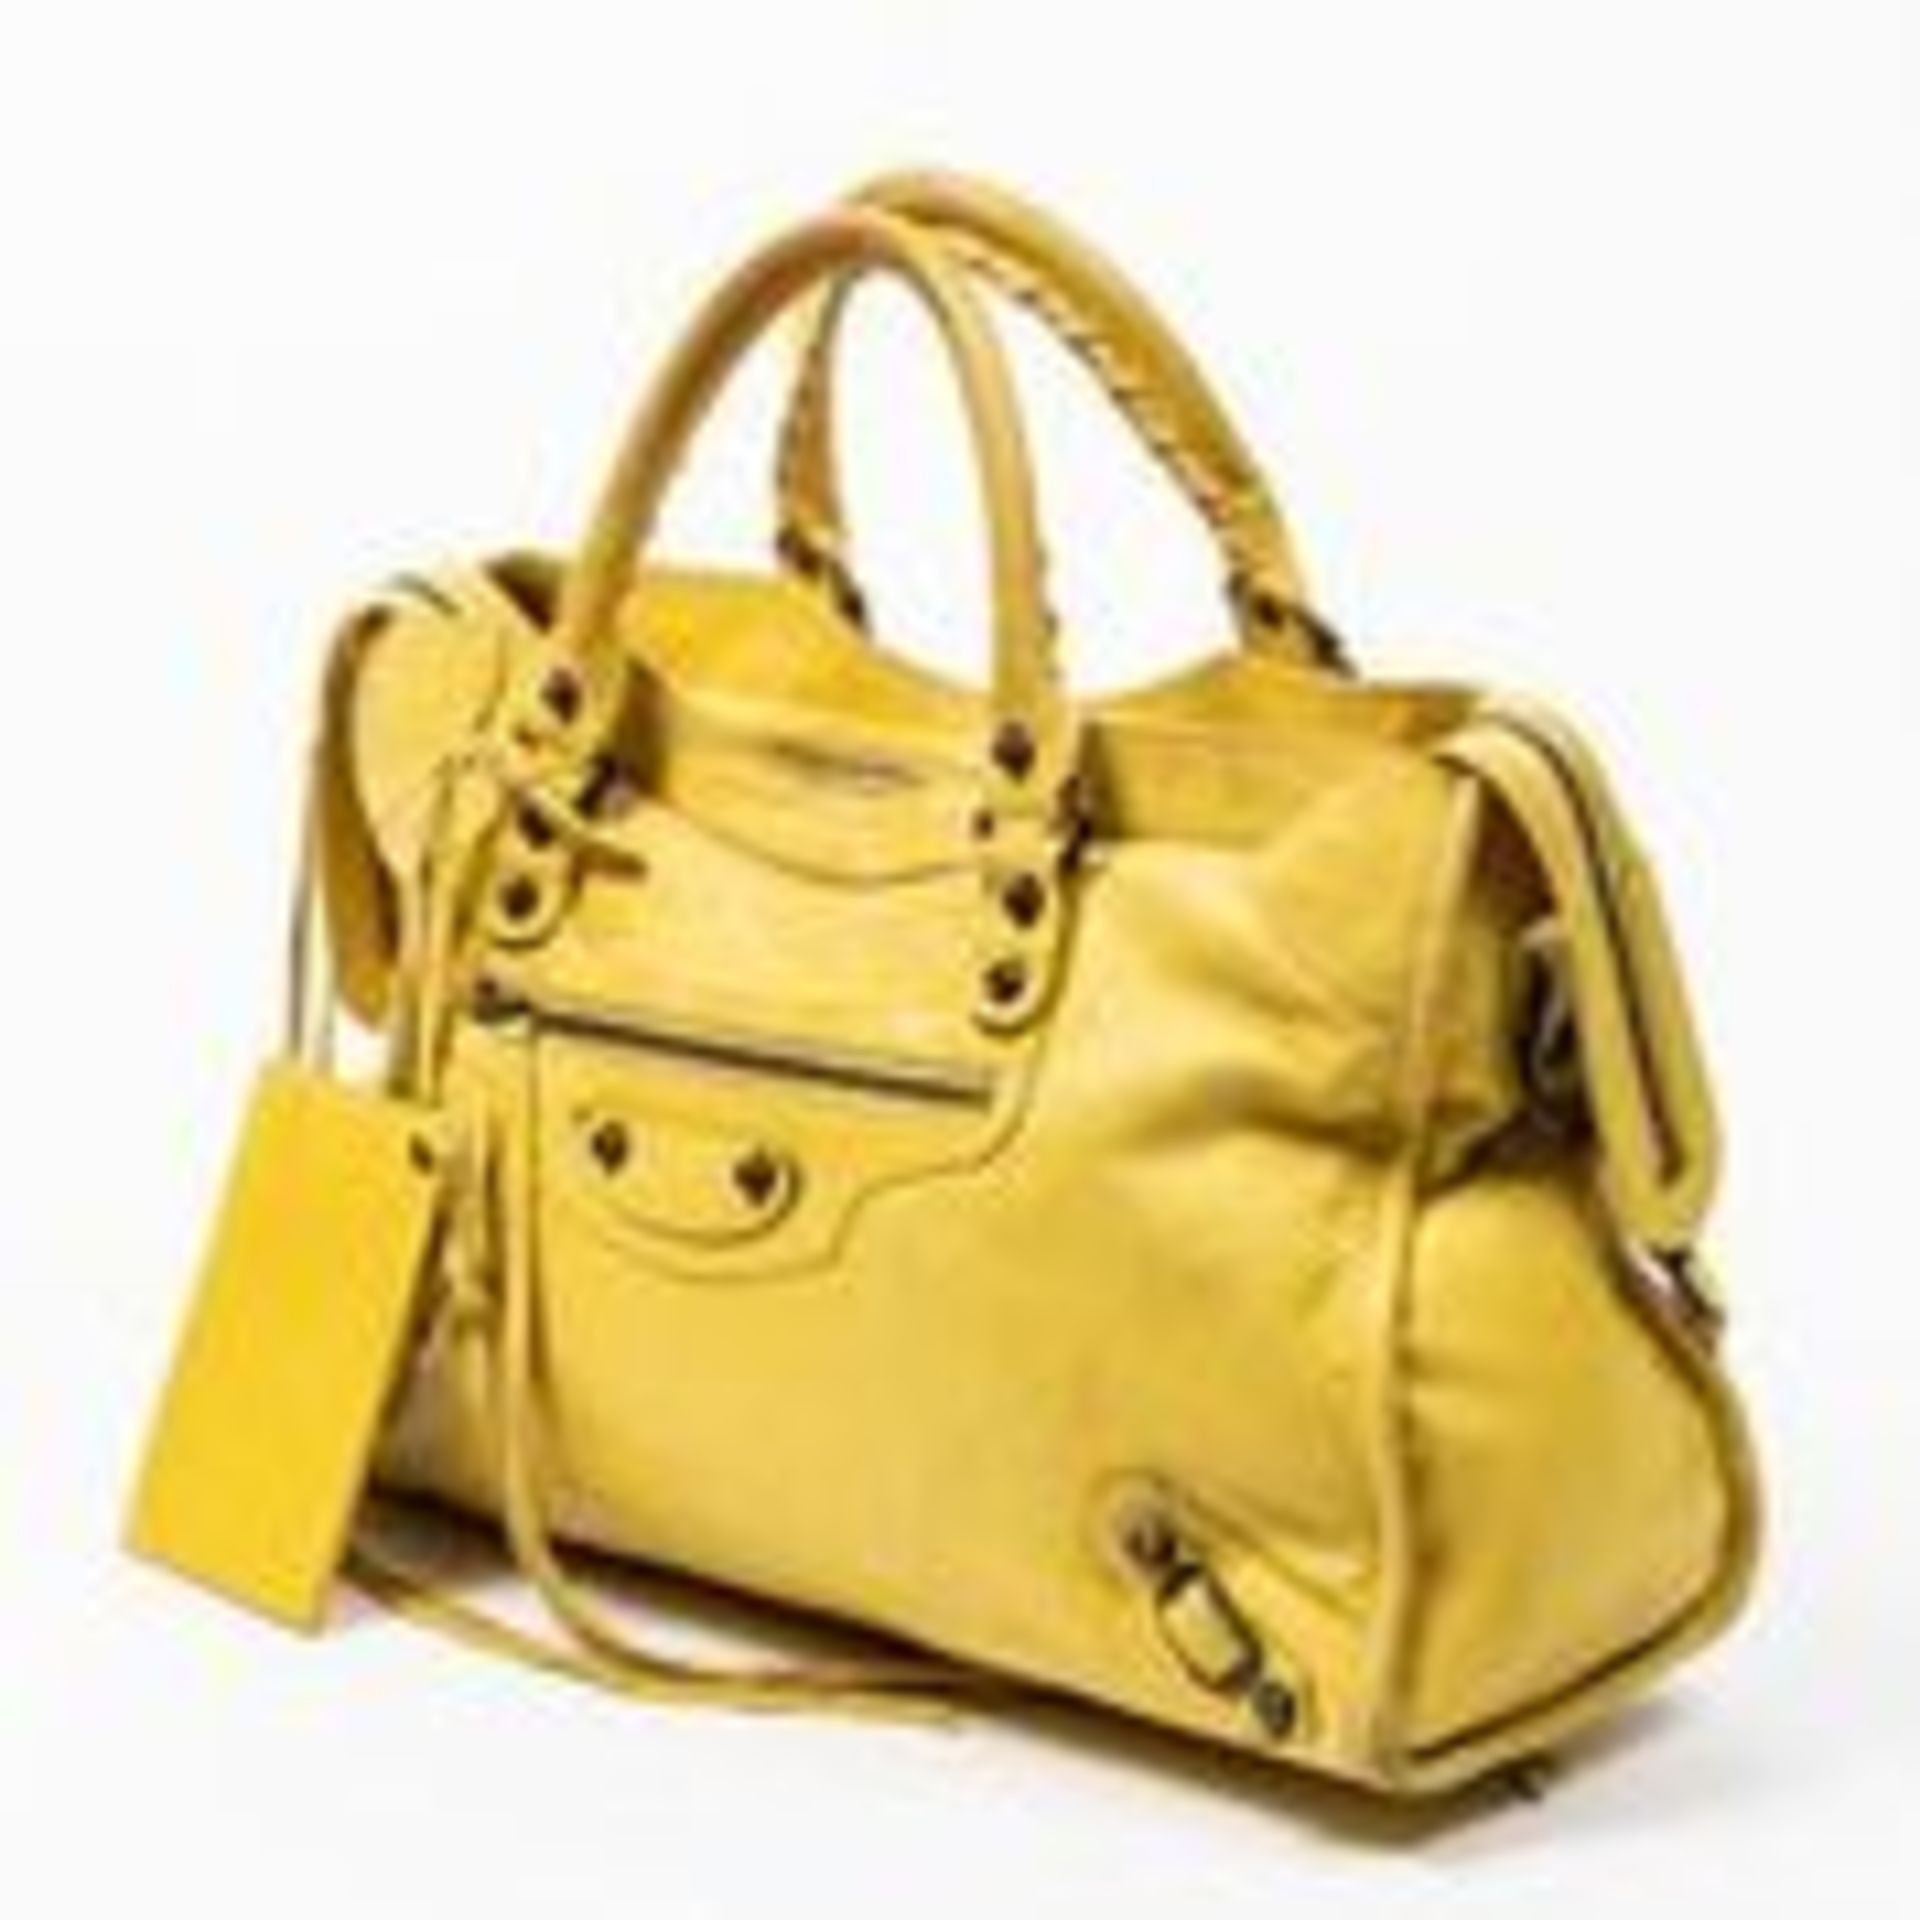 RRP £1,200 Balenciaga Shoulder City Bag Yellow - AAQ3511 - Grade AB - Please Contact Us Directly For - Image 2 of 6